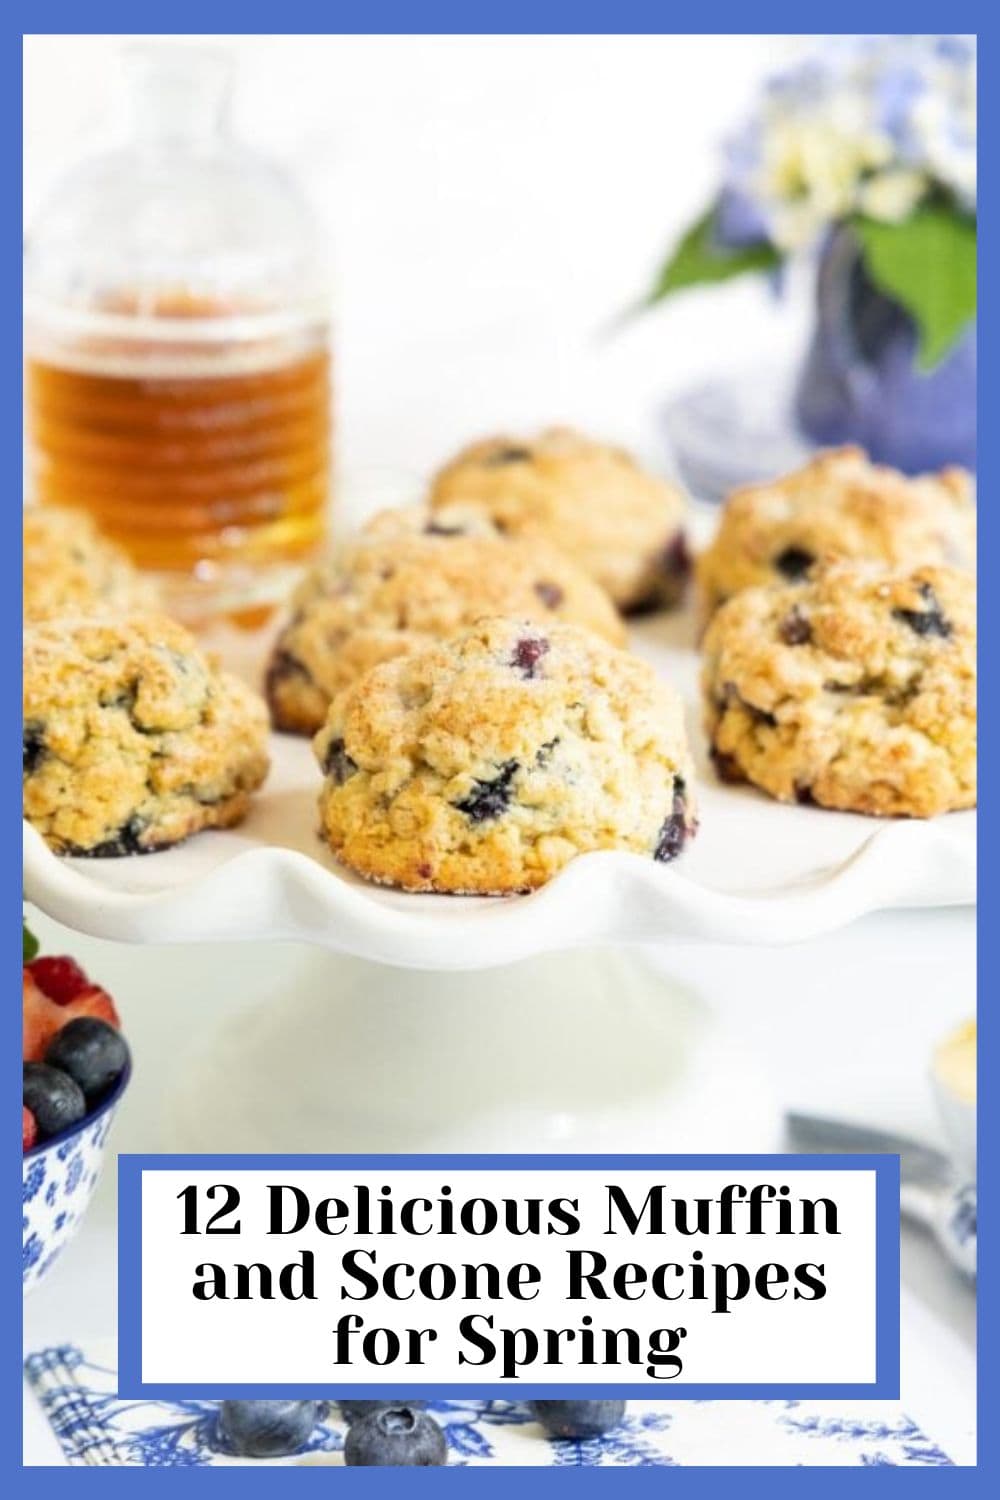 12 Muffin and Scone Recipes You Absolutely Need to Try